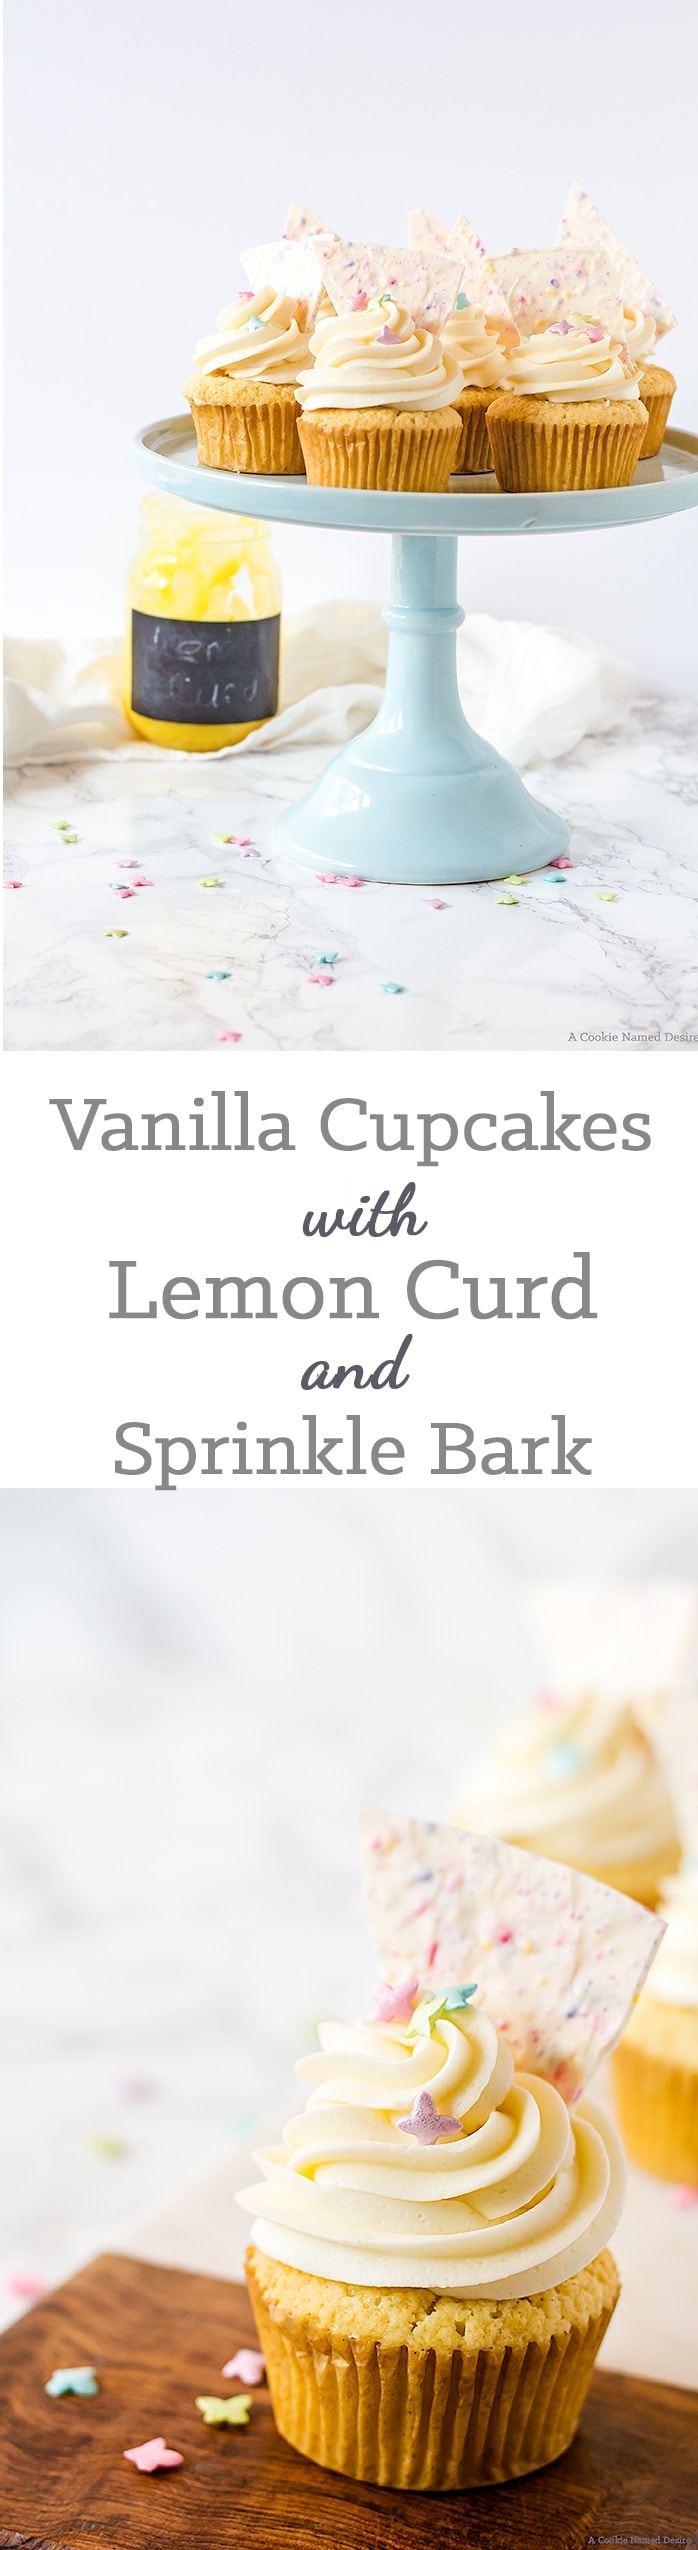 Celebrate Spring with these heavenly vanilla cupcakes filled with a bright lemon curd and topped with a fun sprinkle-filled white chocolate bark! 